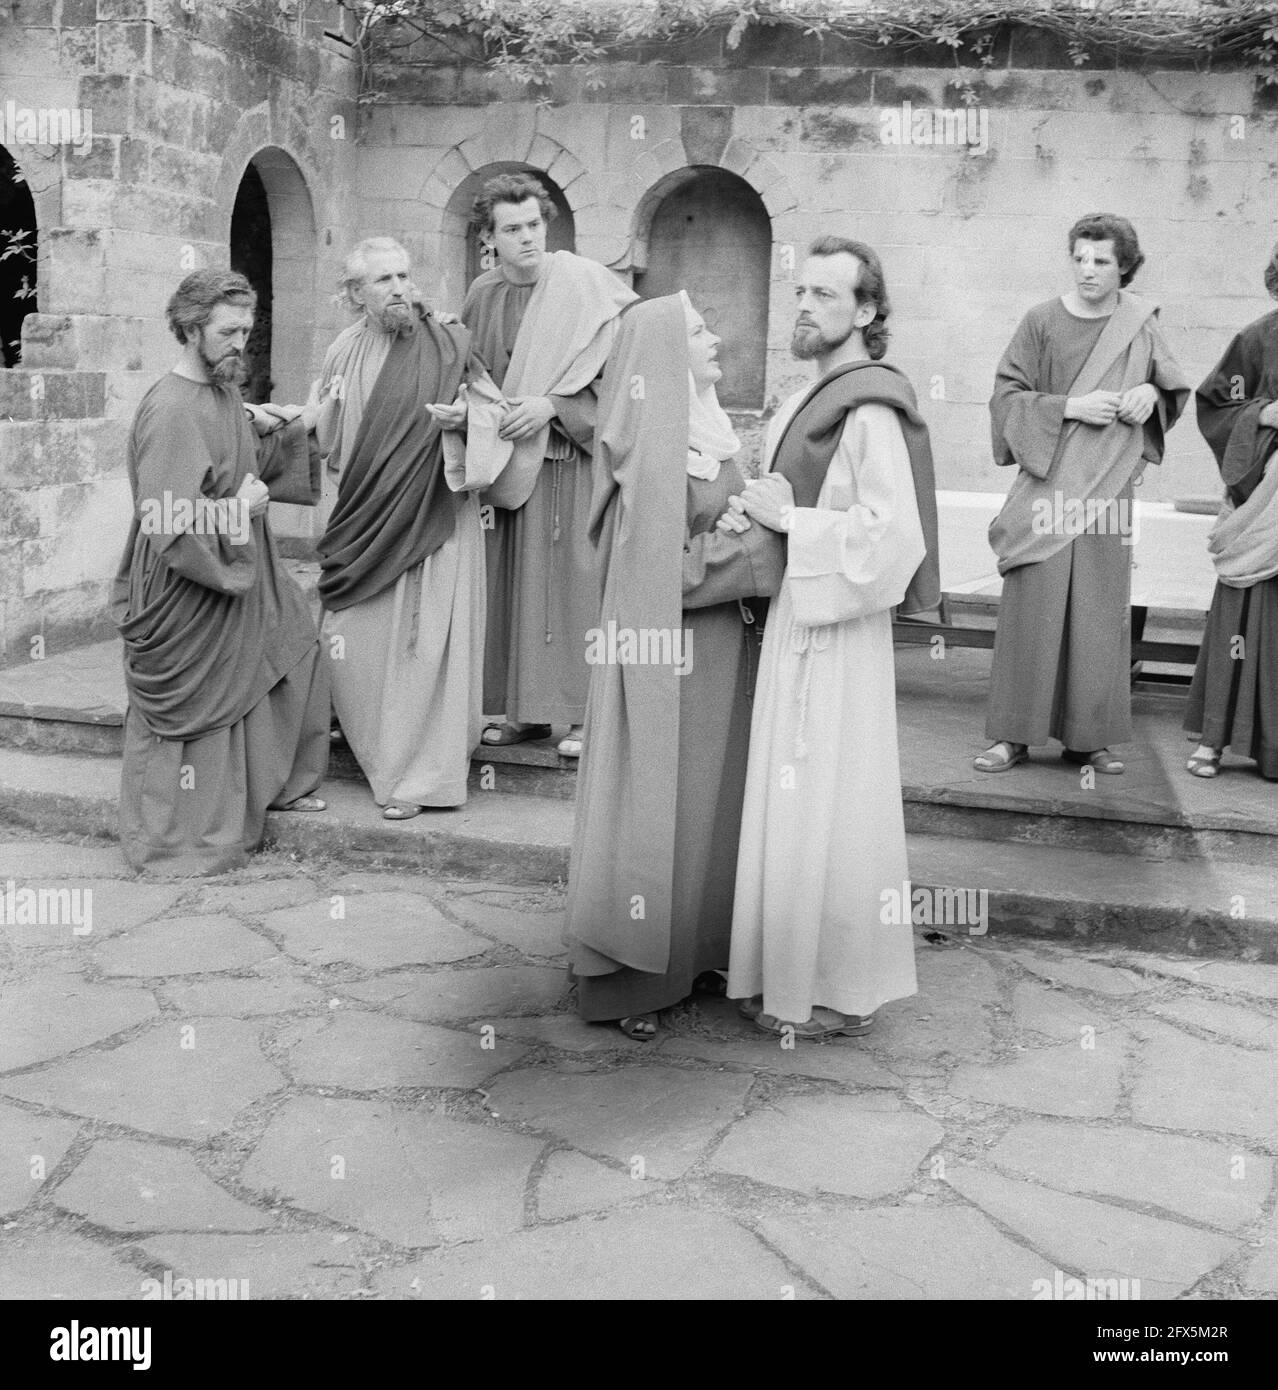 General rehearsal of the Passion plays at Tegelen, Jesus and Mary and the disciples, May 16, 1960, passion plays, The Netherlands, 20th century press agency photo, news to remember, documentary, historic photography 1945-1990, visual stories, human history of the Twentieth Century, capturing moments in time Stock Photo